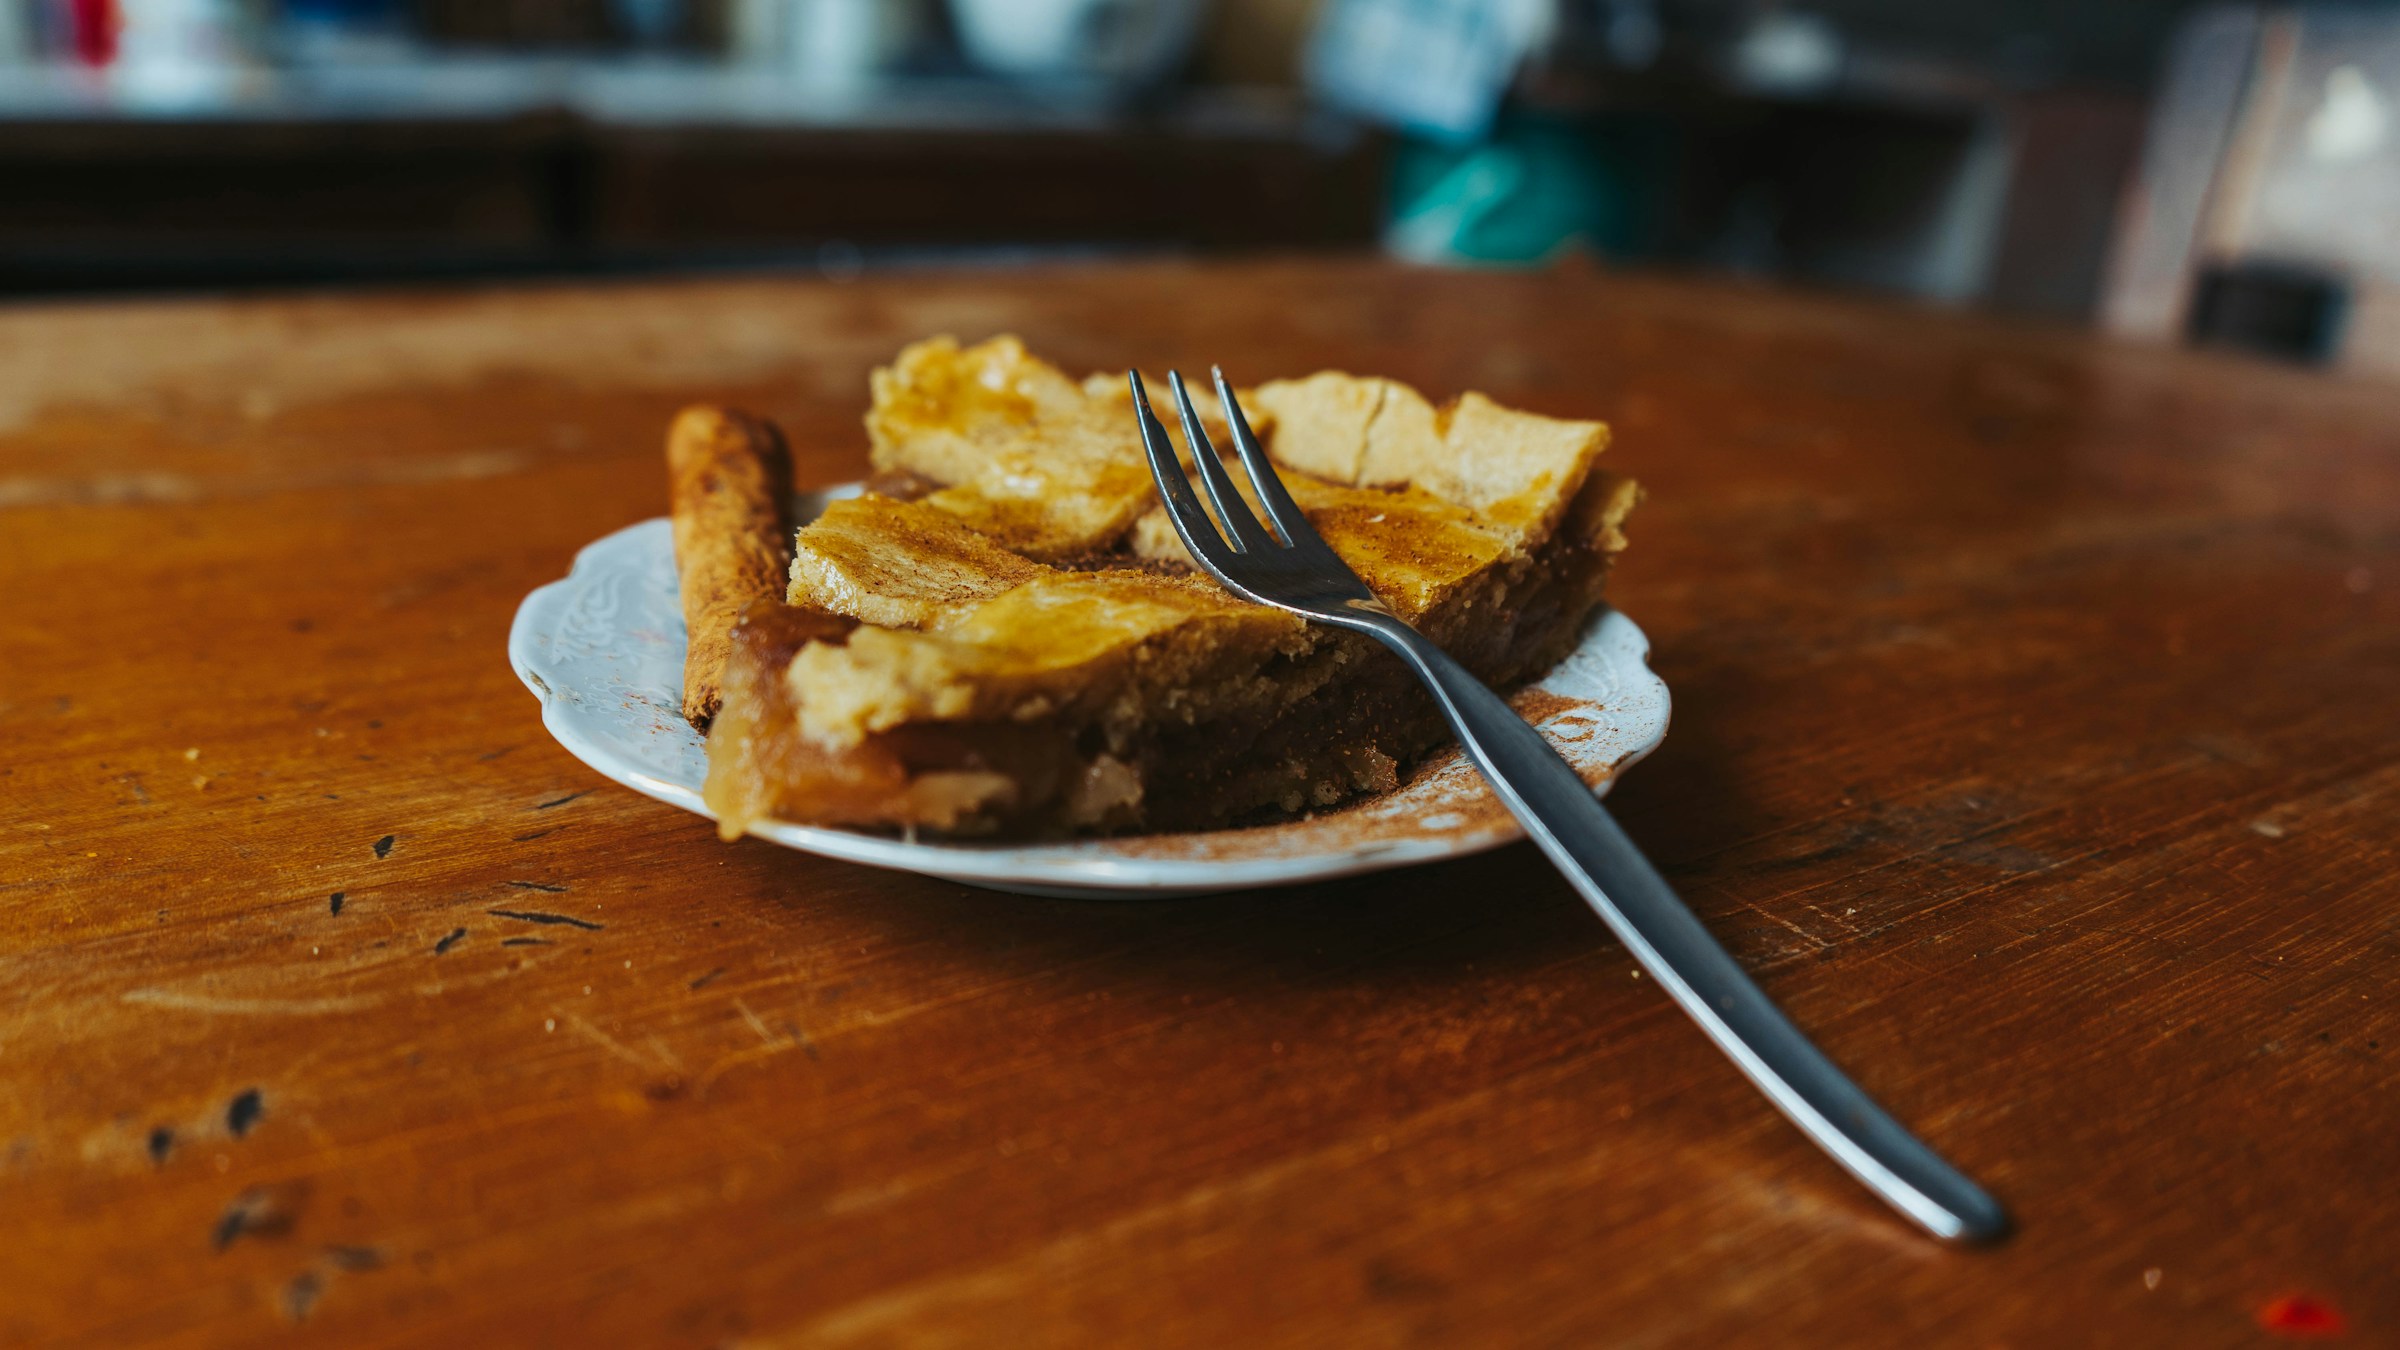 A slice of pie on a plate | Source: Unsplash